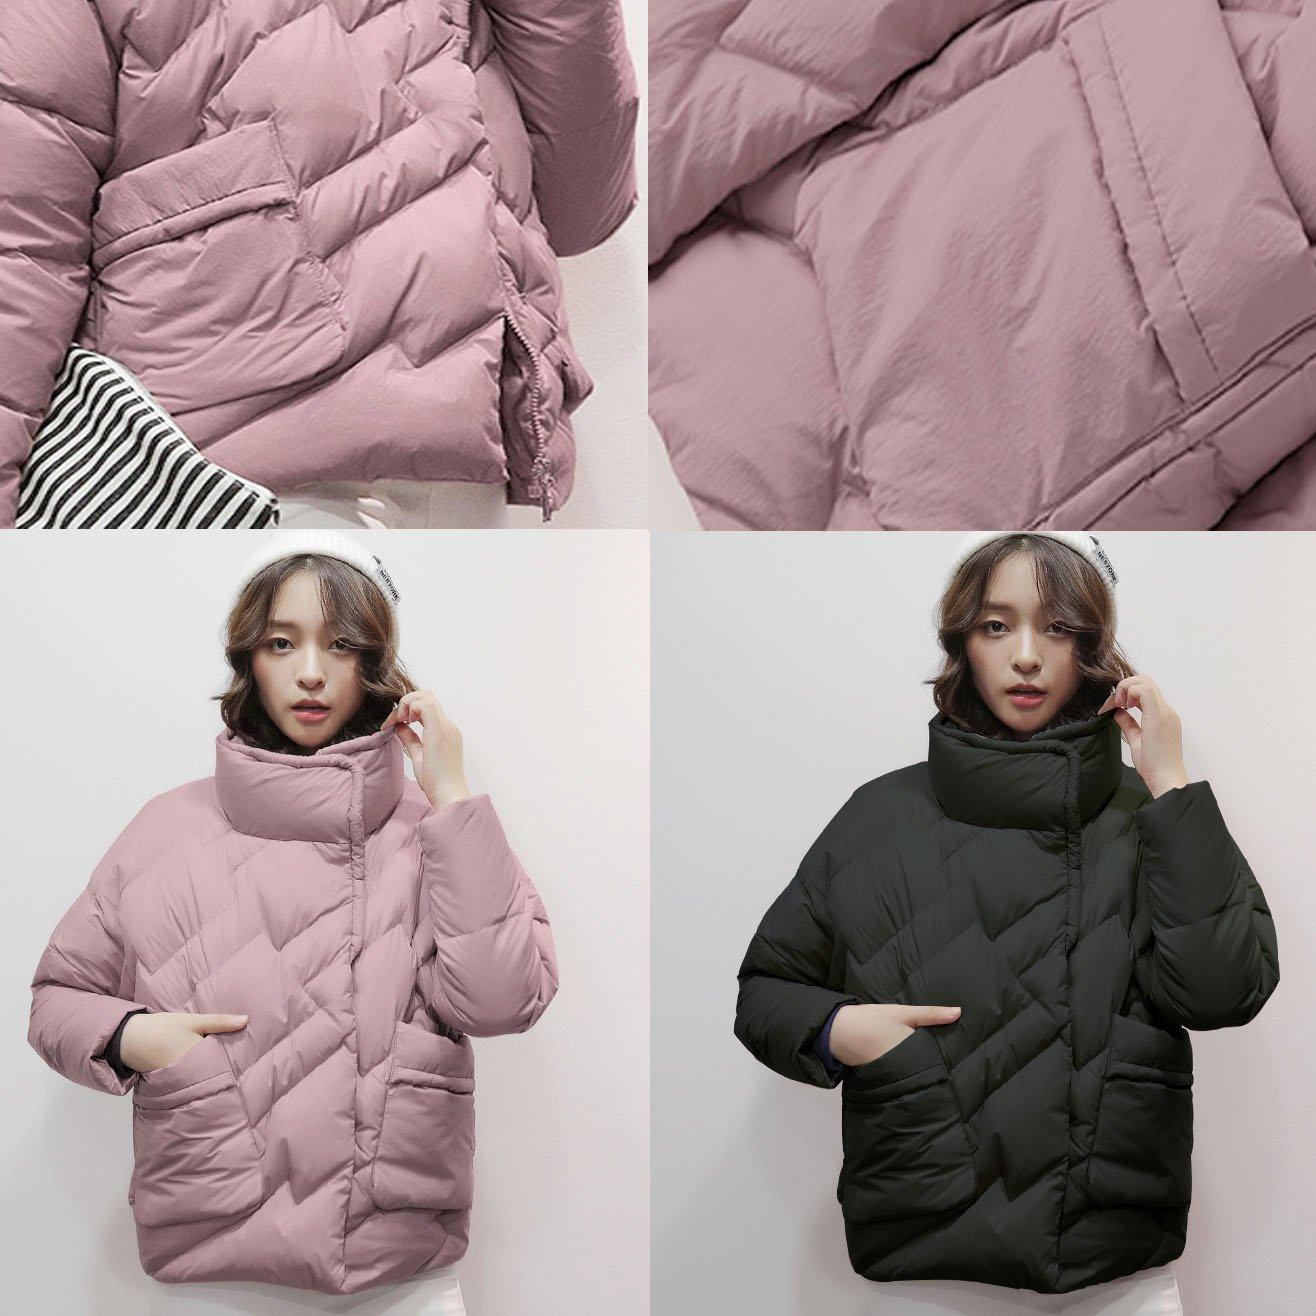 Warm pink down jacket woman plus size stand collar winter jacket zippered winter outwear - Omychic